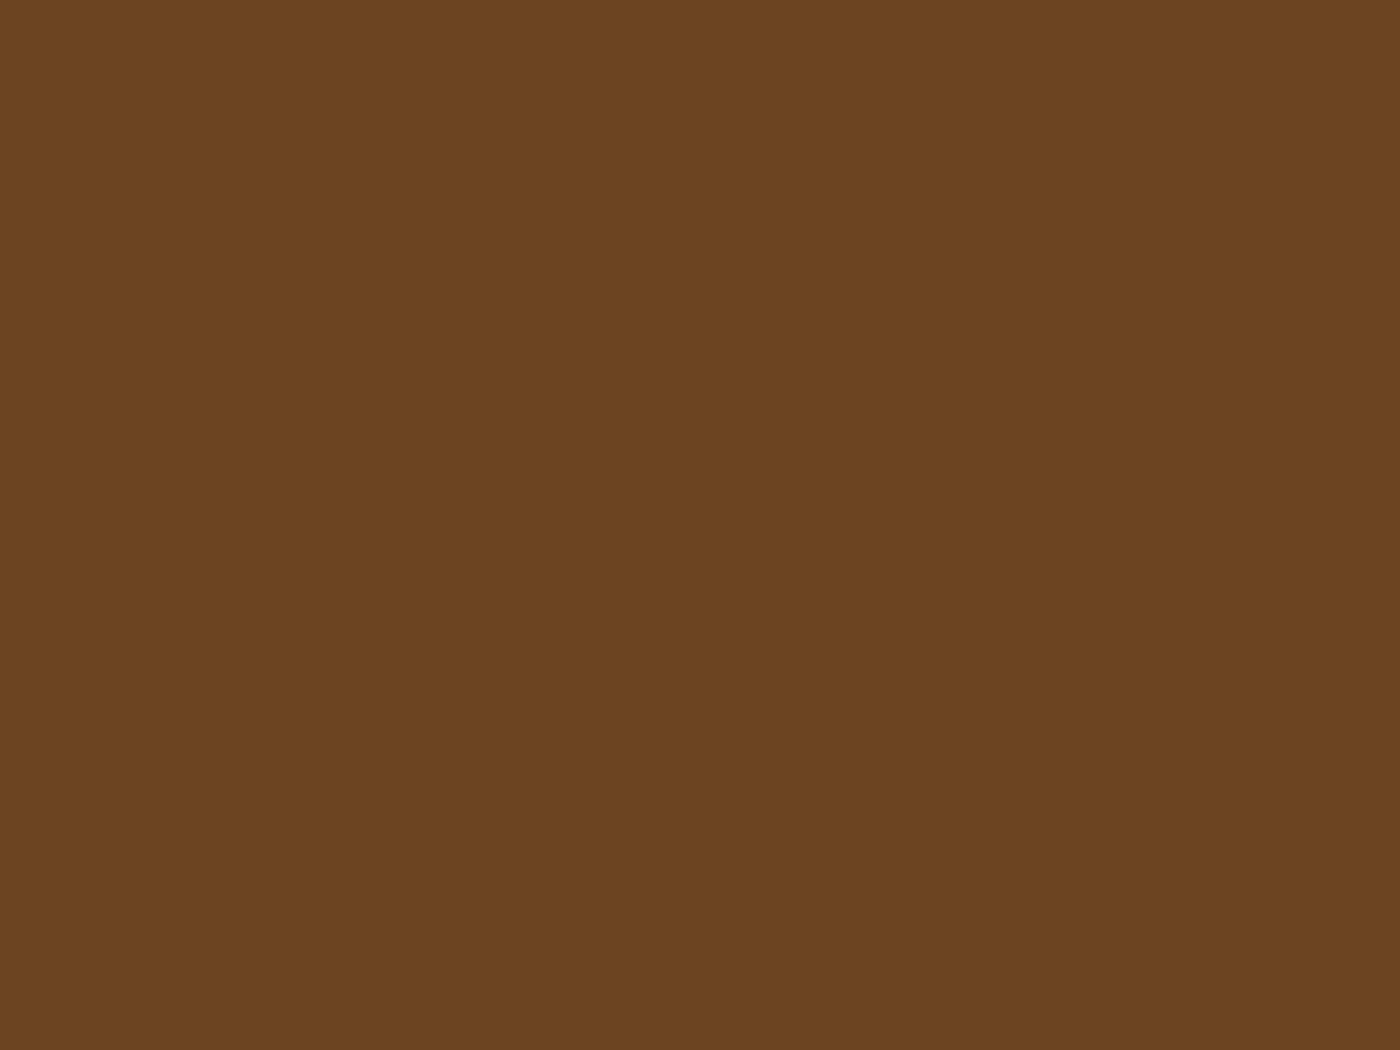 1400x1050 Brown-nose Solid Color Background